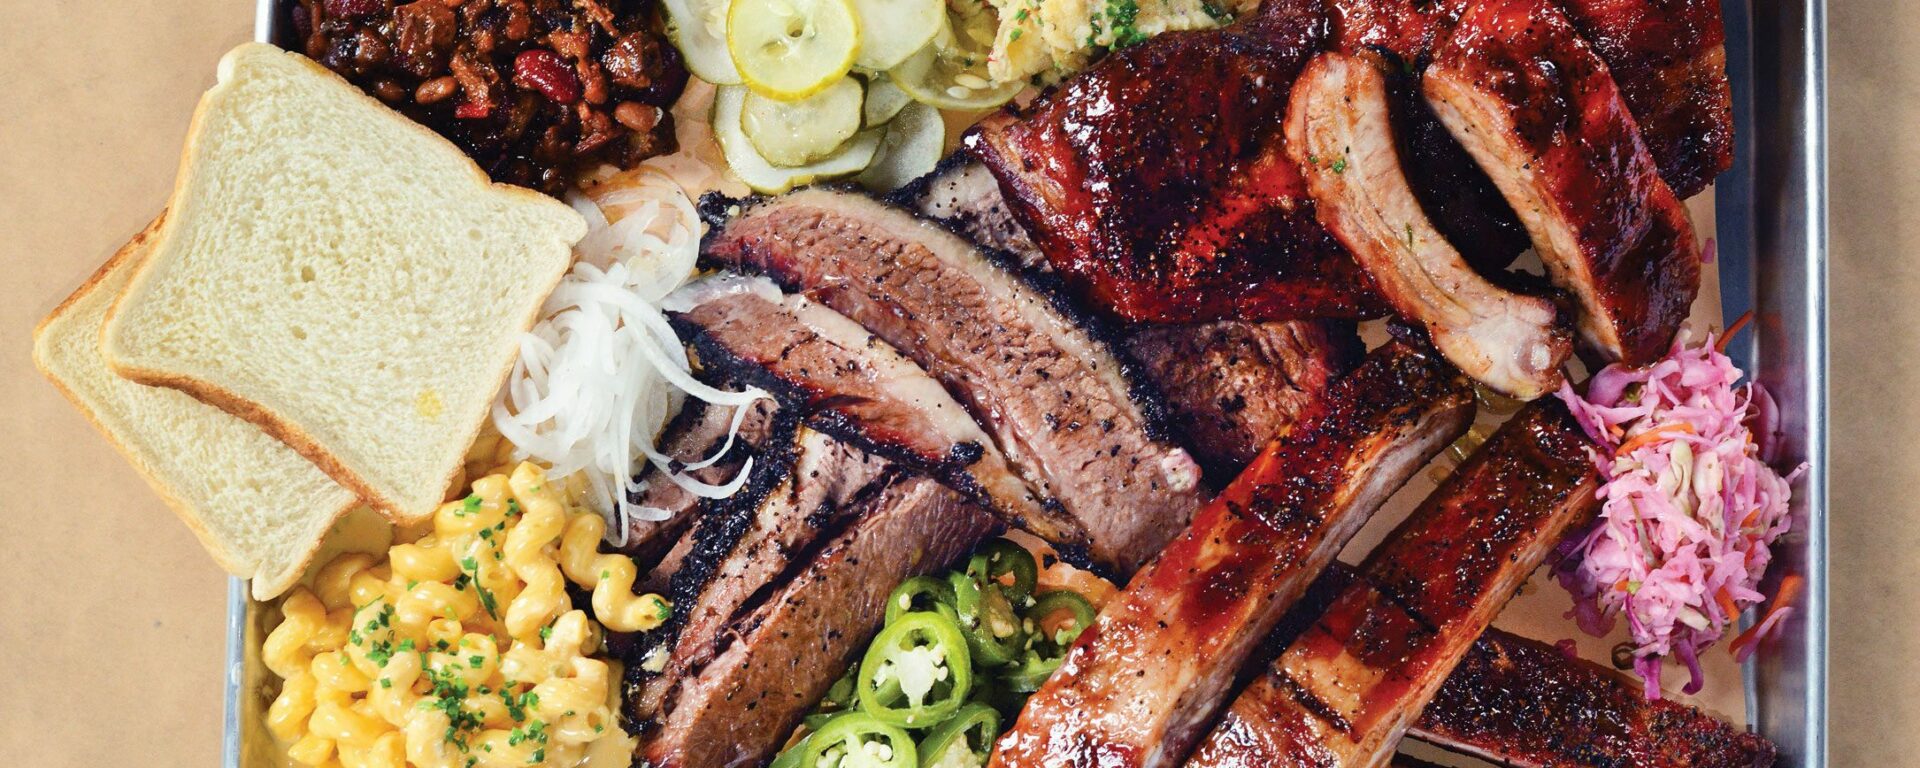 What a typical Texas Barbecue dish looks like. Courtesy Toronto Life